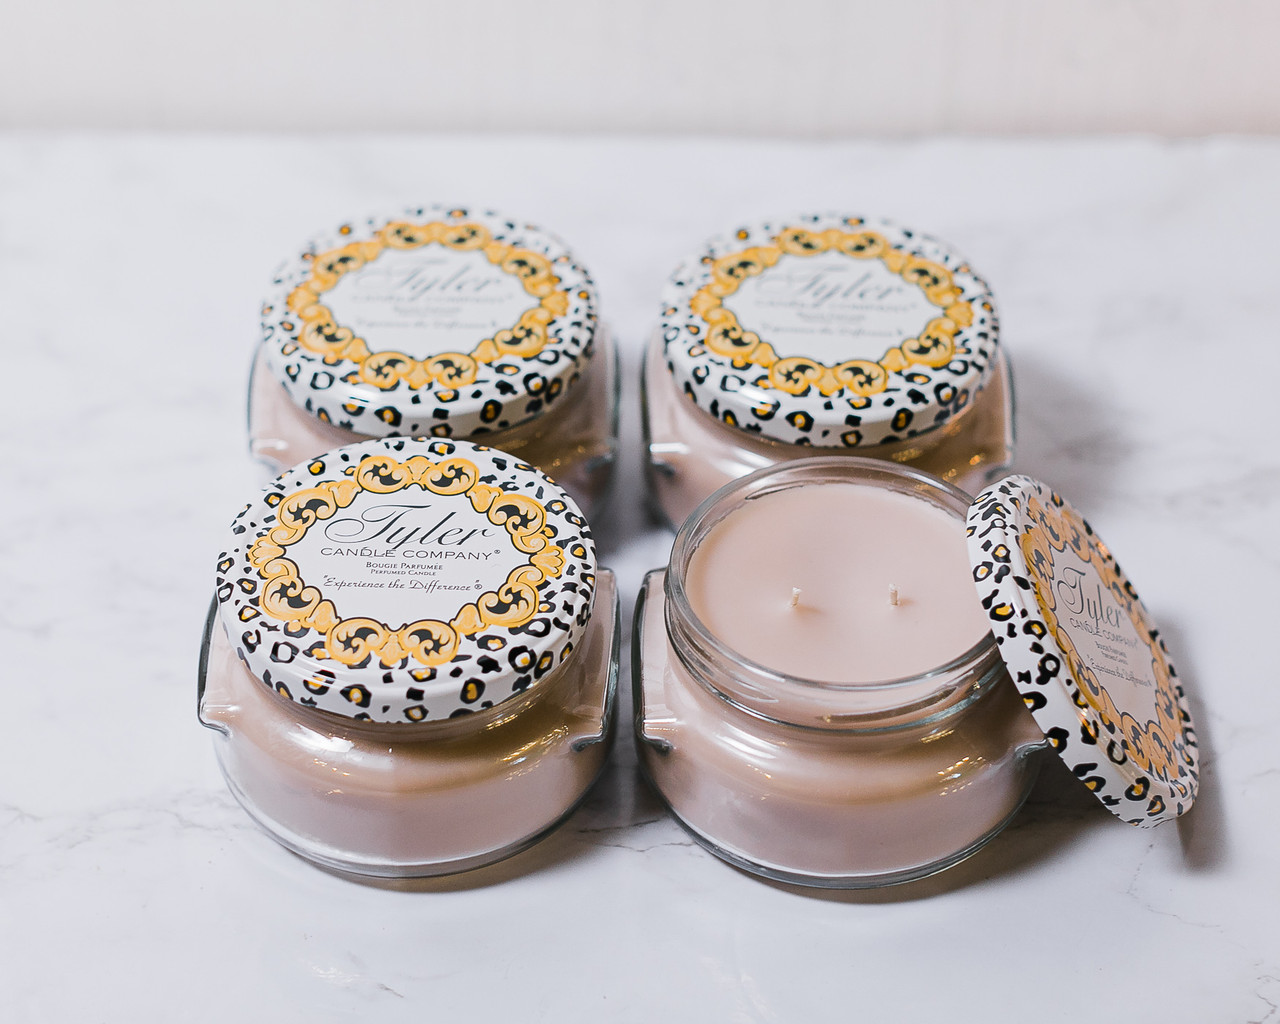 Tyler Candle Mixer Melts Set of 4 - High Maintenance, floral,patchouli and  vanilla